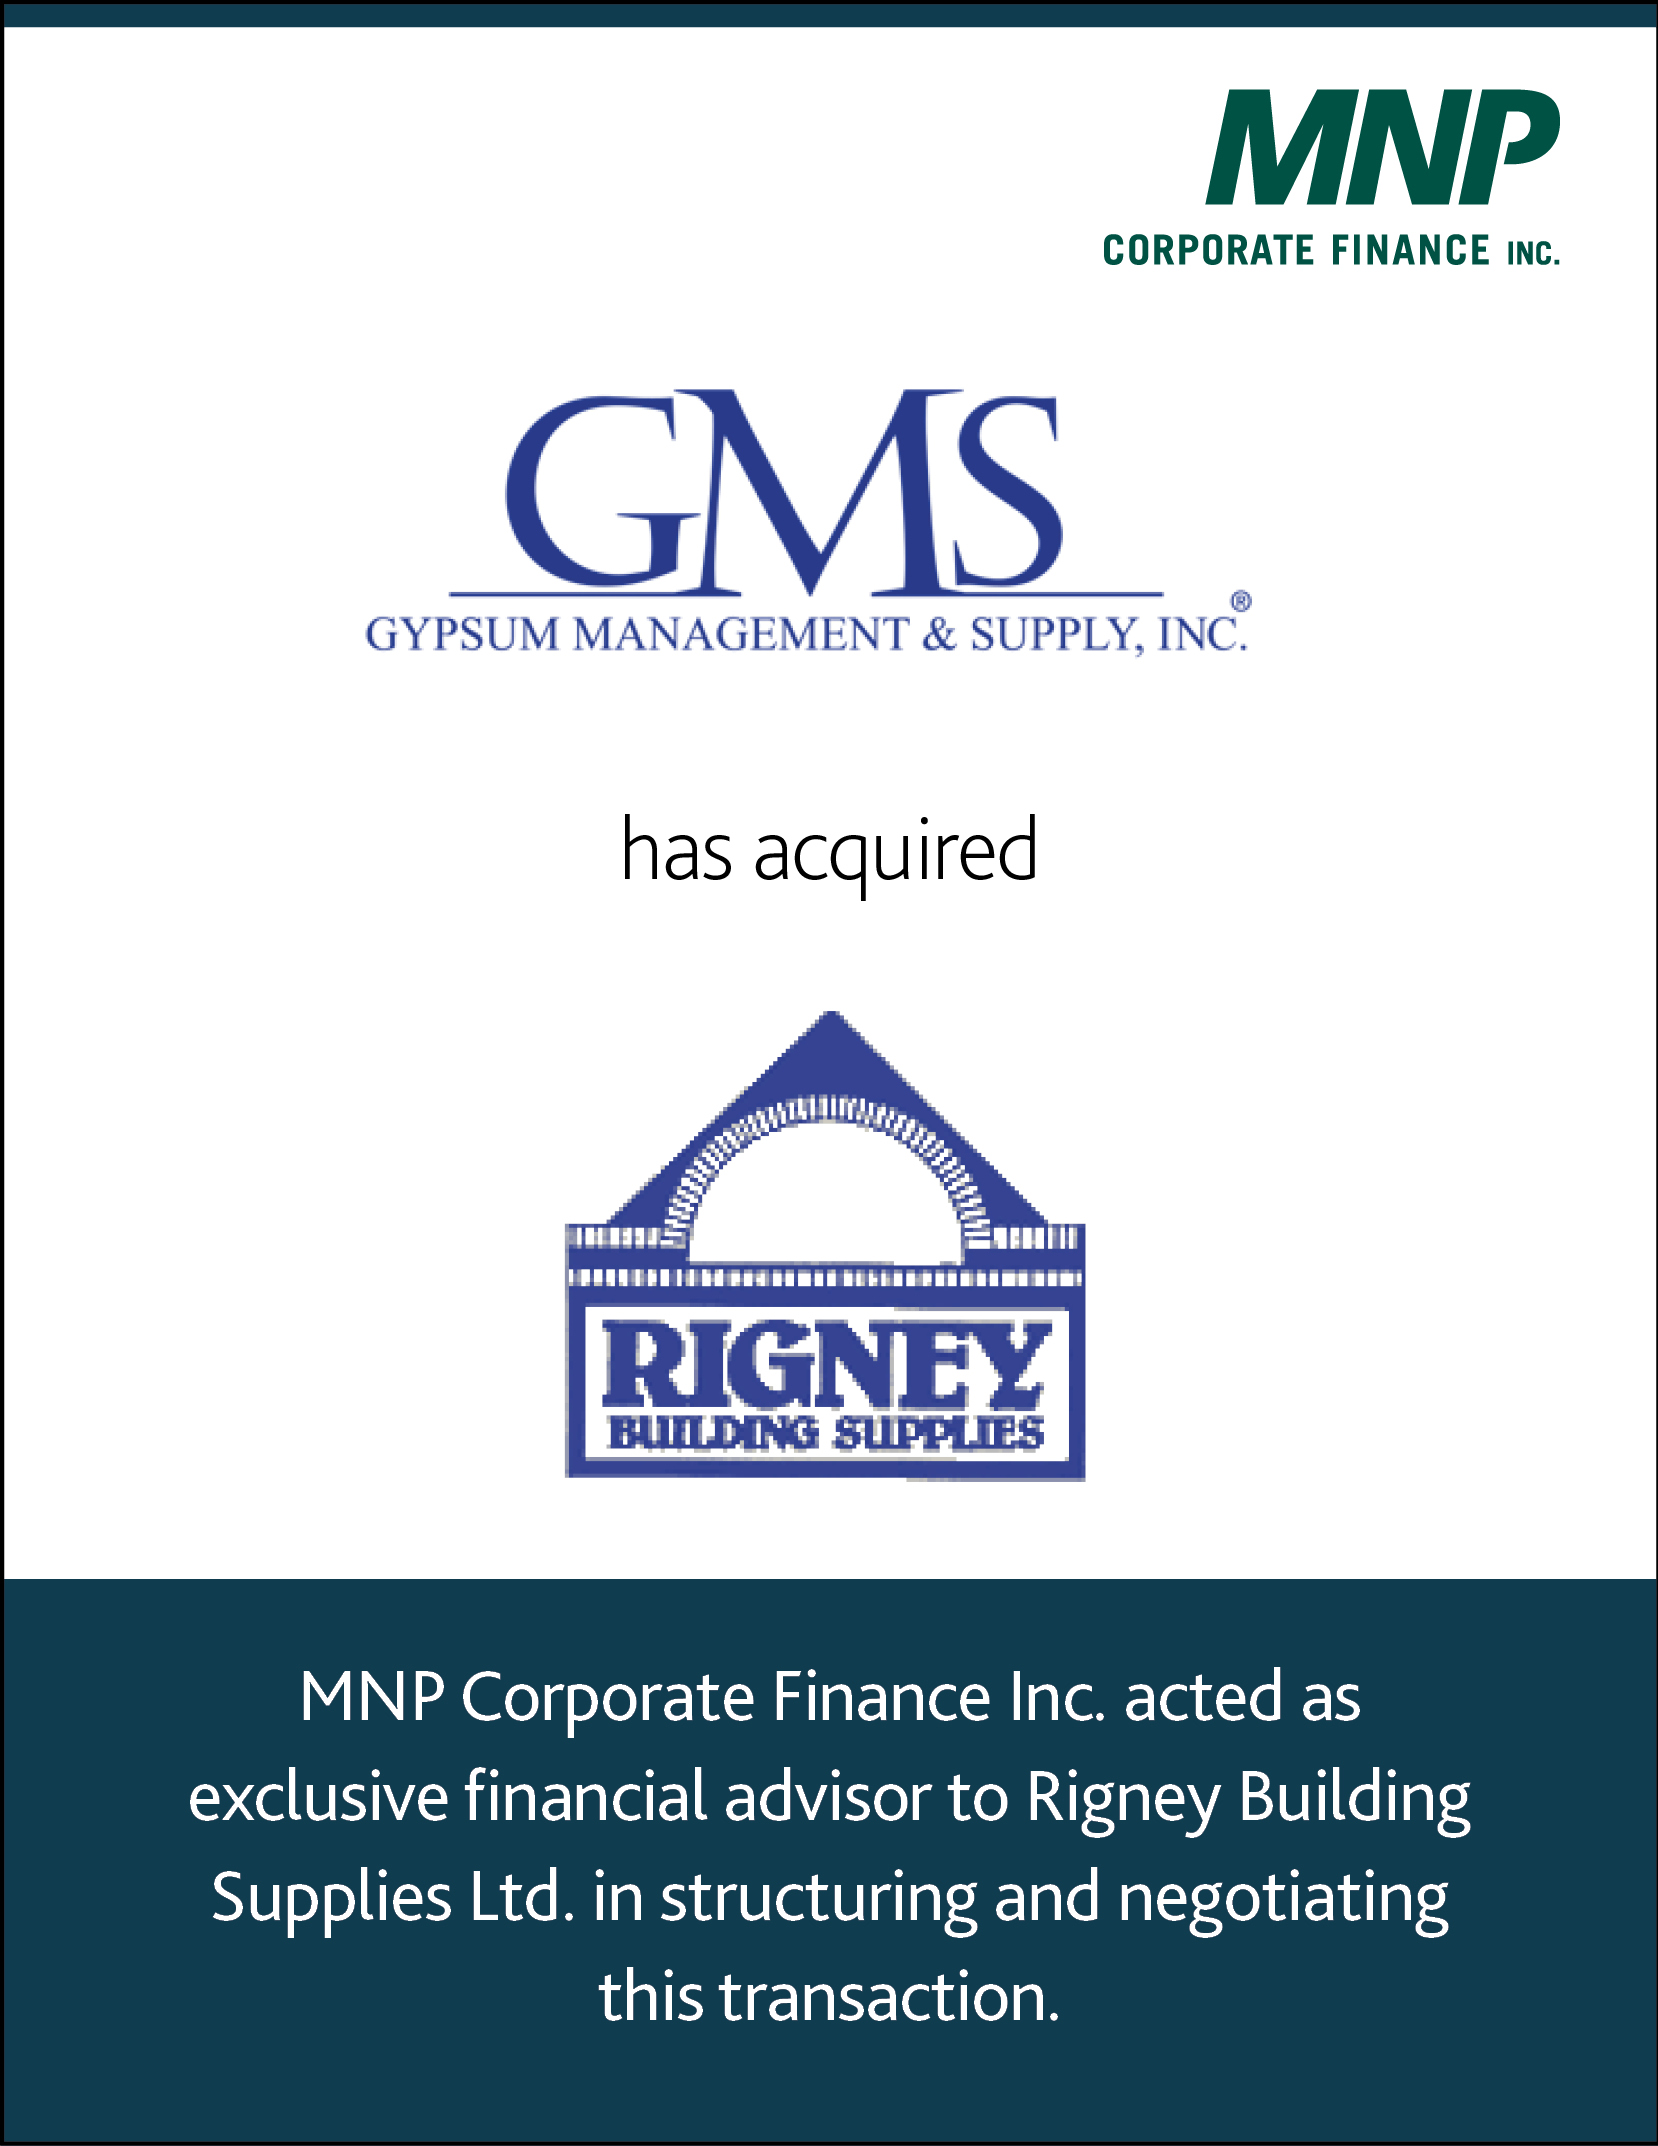 GMS Gypsum Management & Supply Inc has acquired Rigney Building Supplies